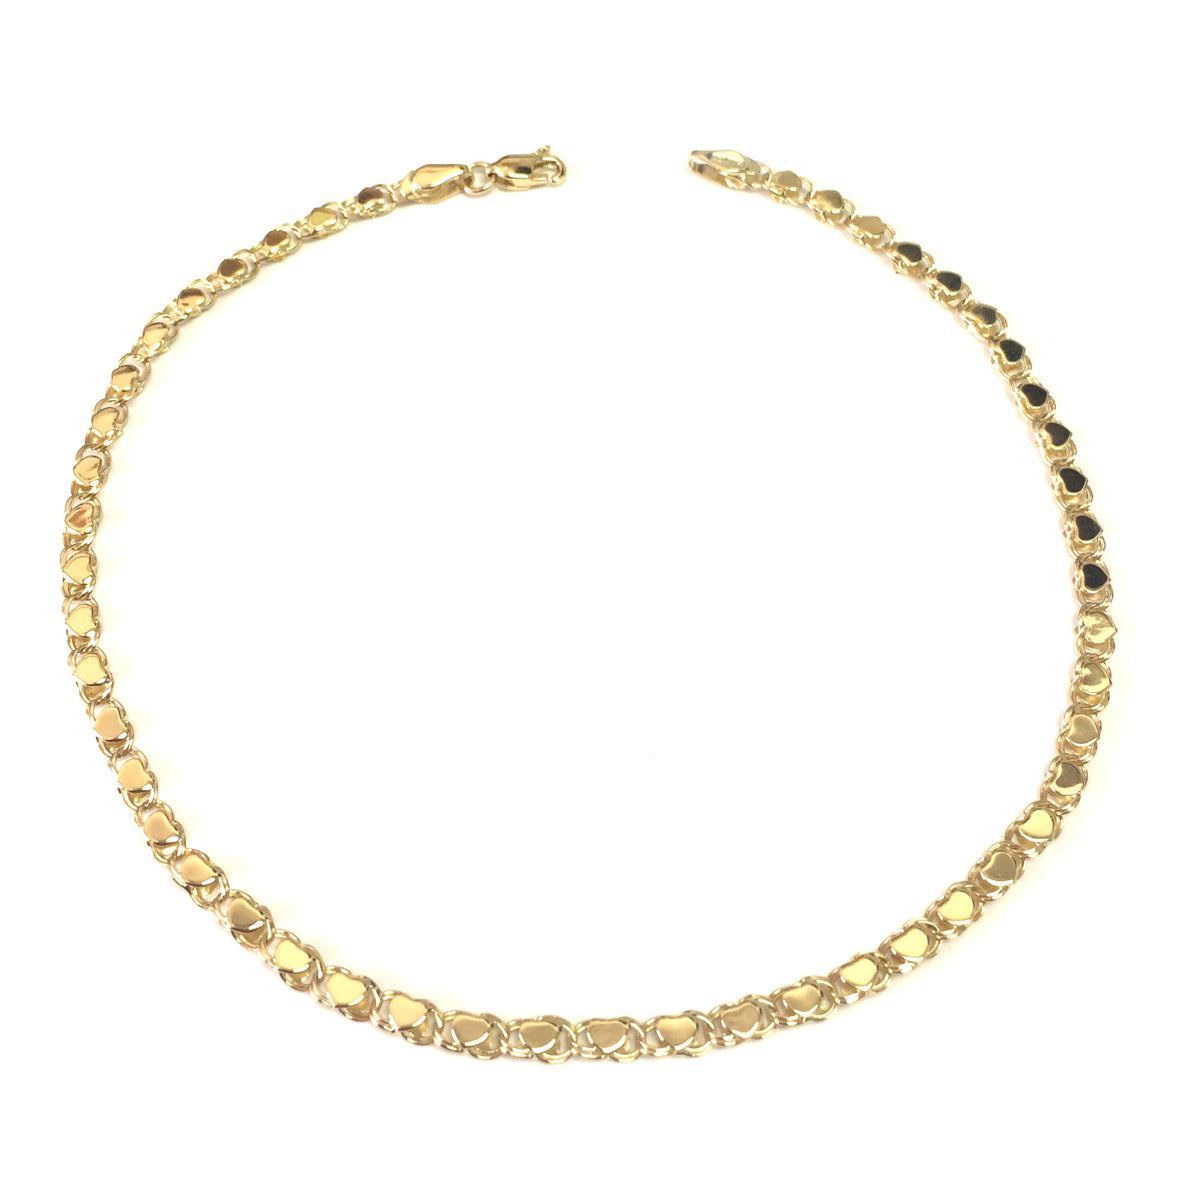 14K Yellow Gold Diamond Cut Hearts Chain Anklet, 10"